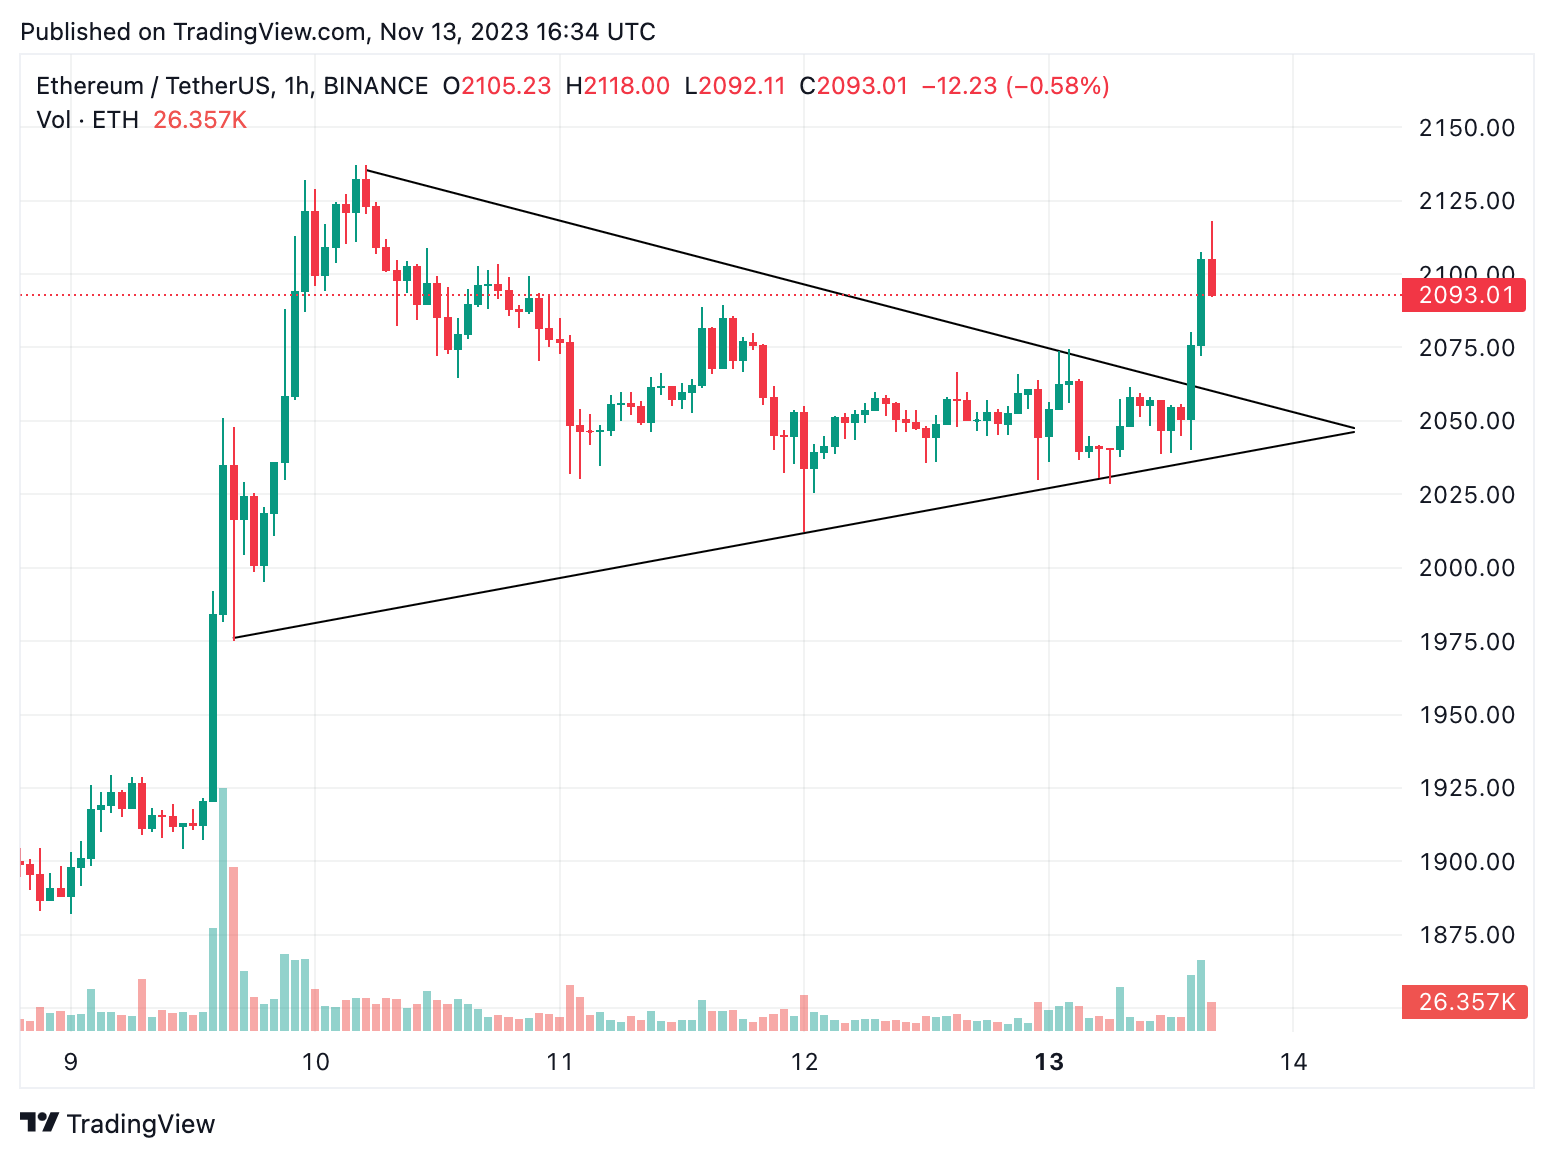 Ethereum (ETH) breaks out and ecosystem alts follow